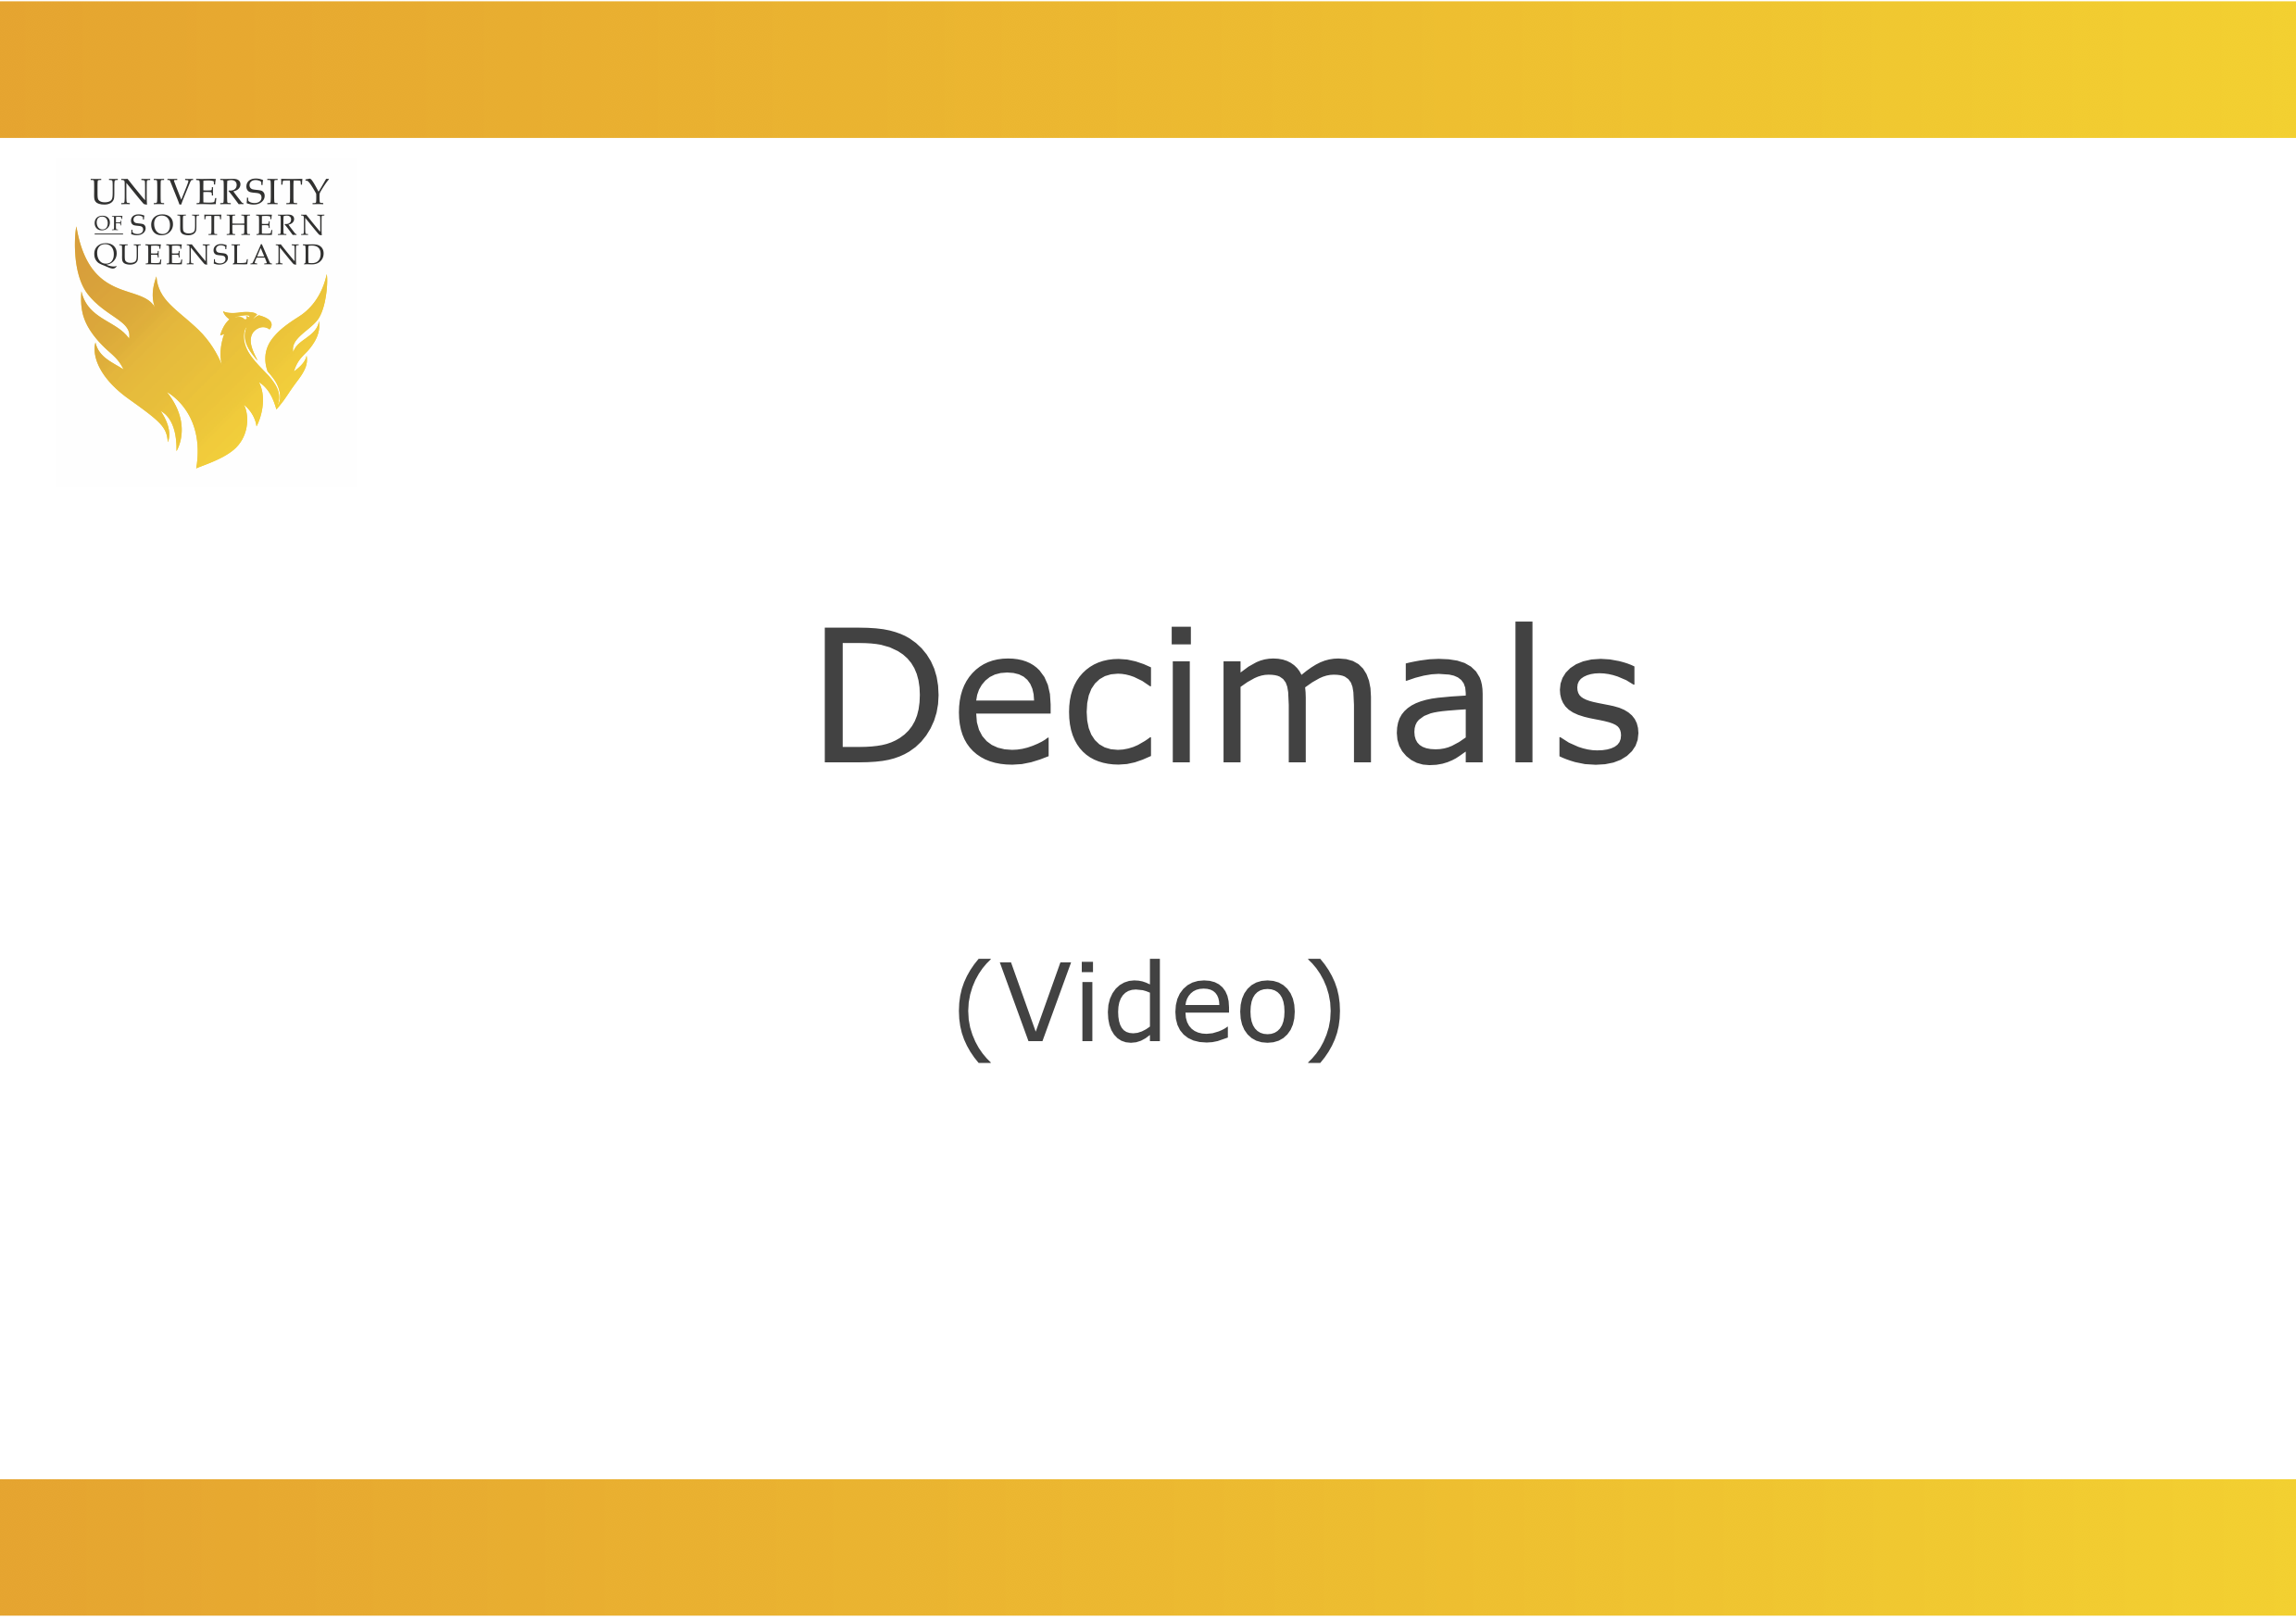 Image for the Decimals video